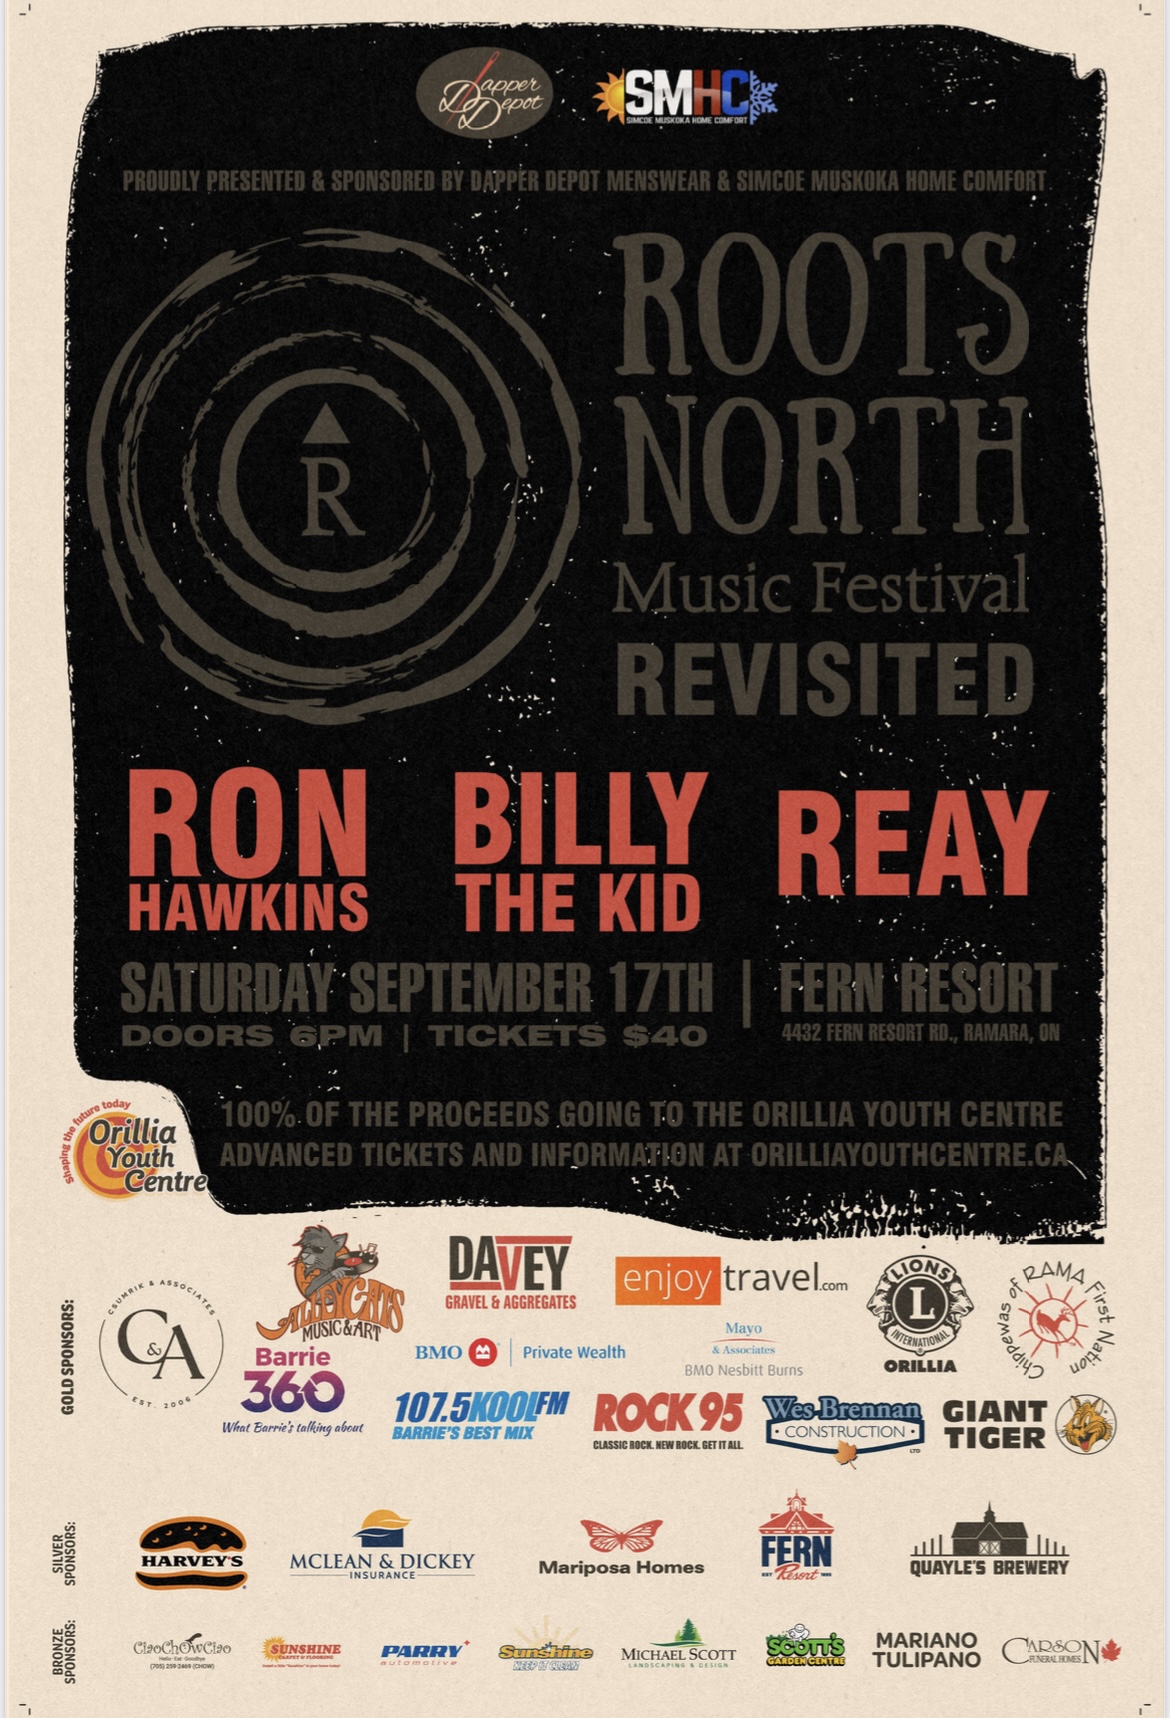 Roots North Music Festival Revisited Rock 95